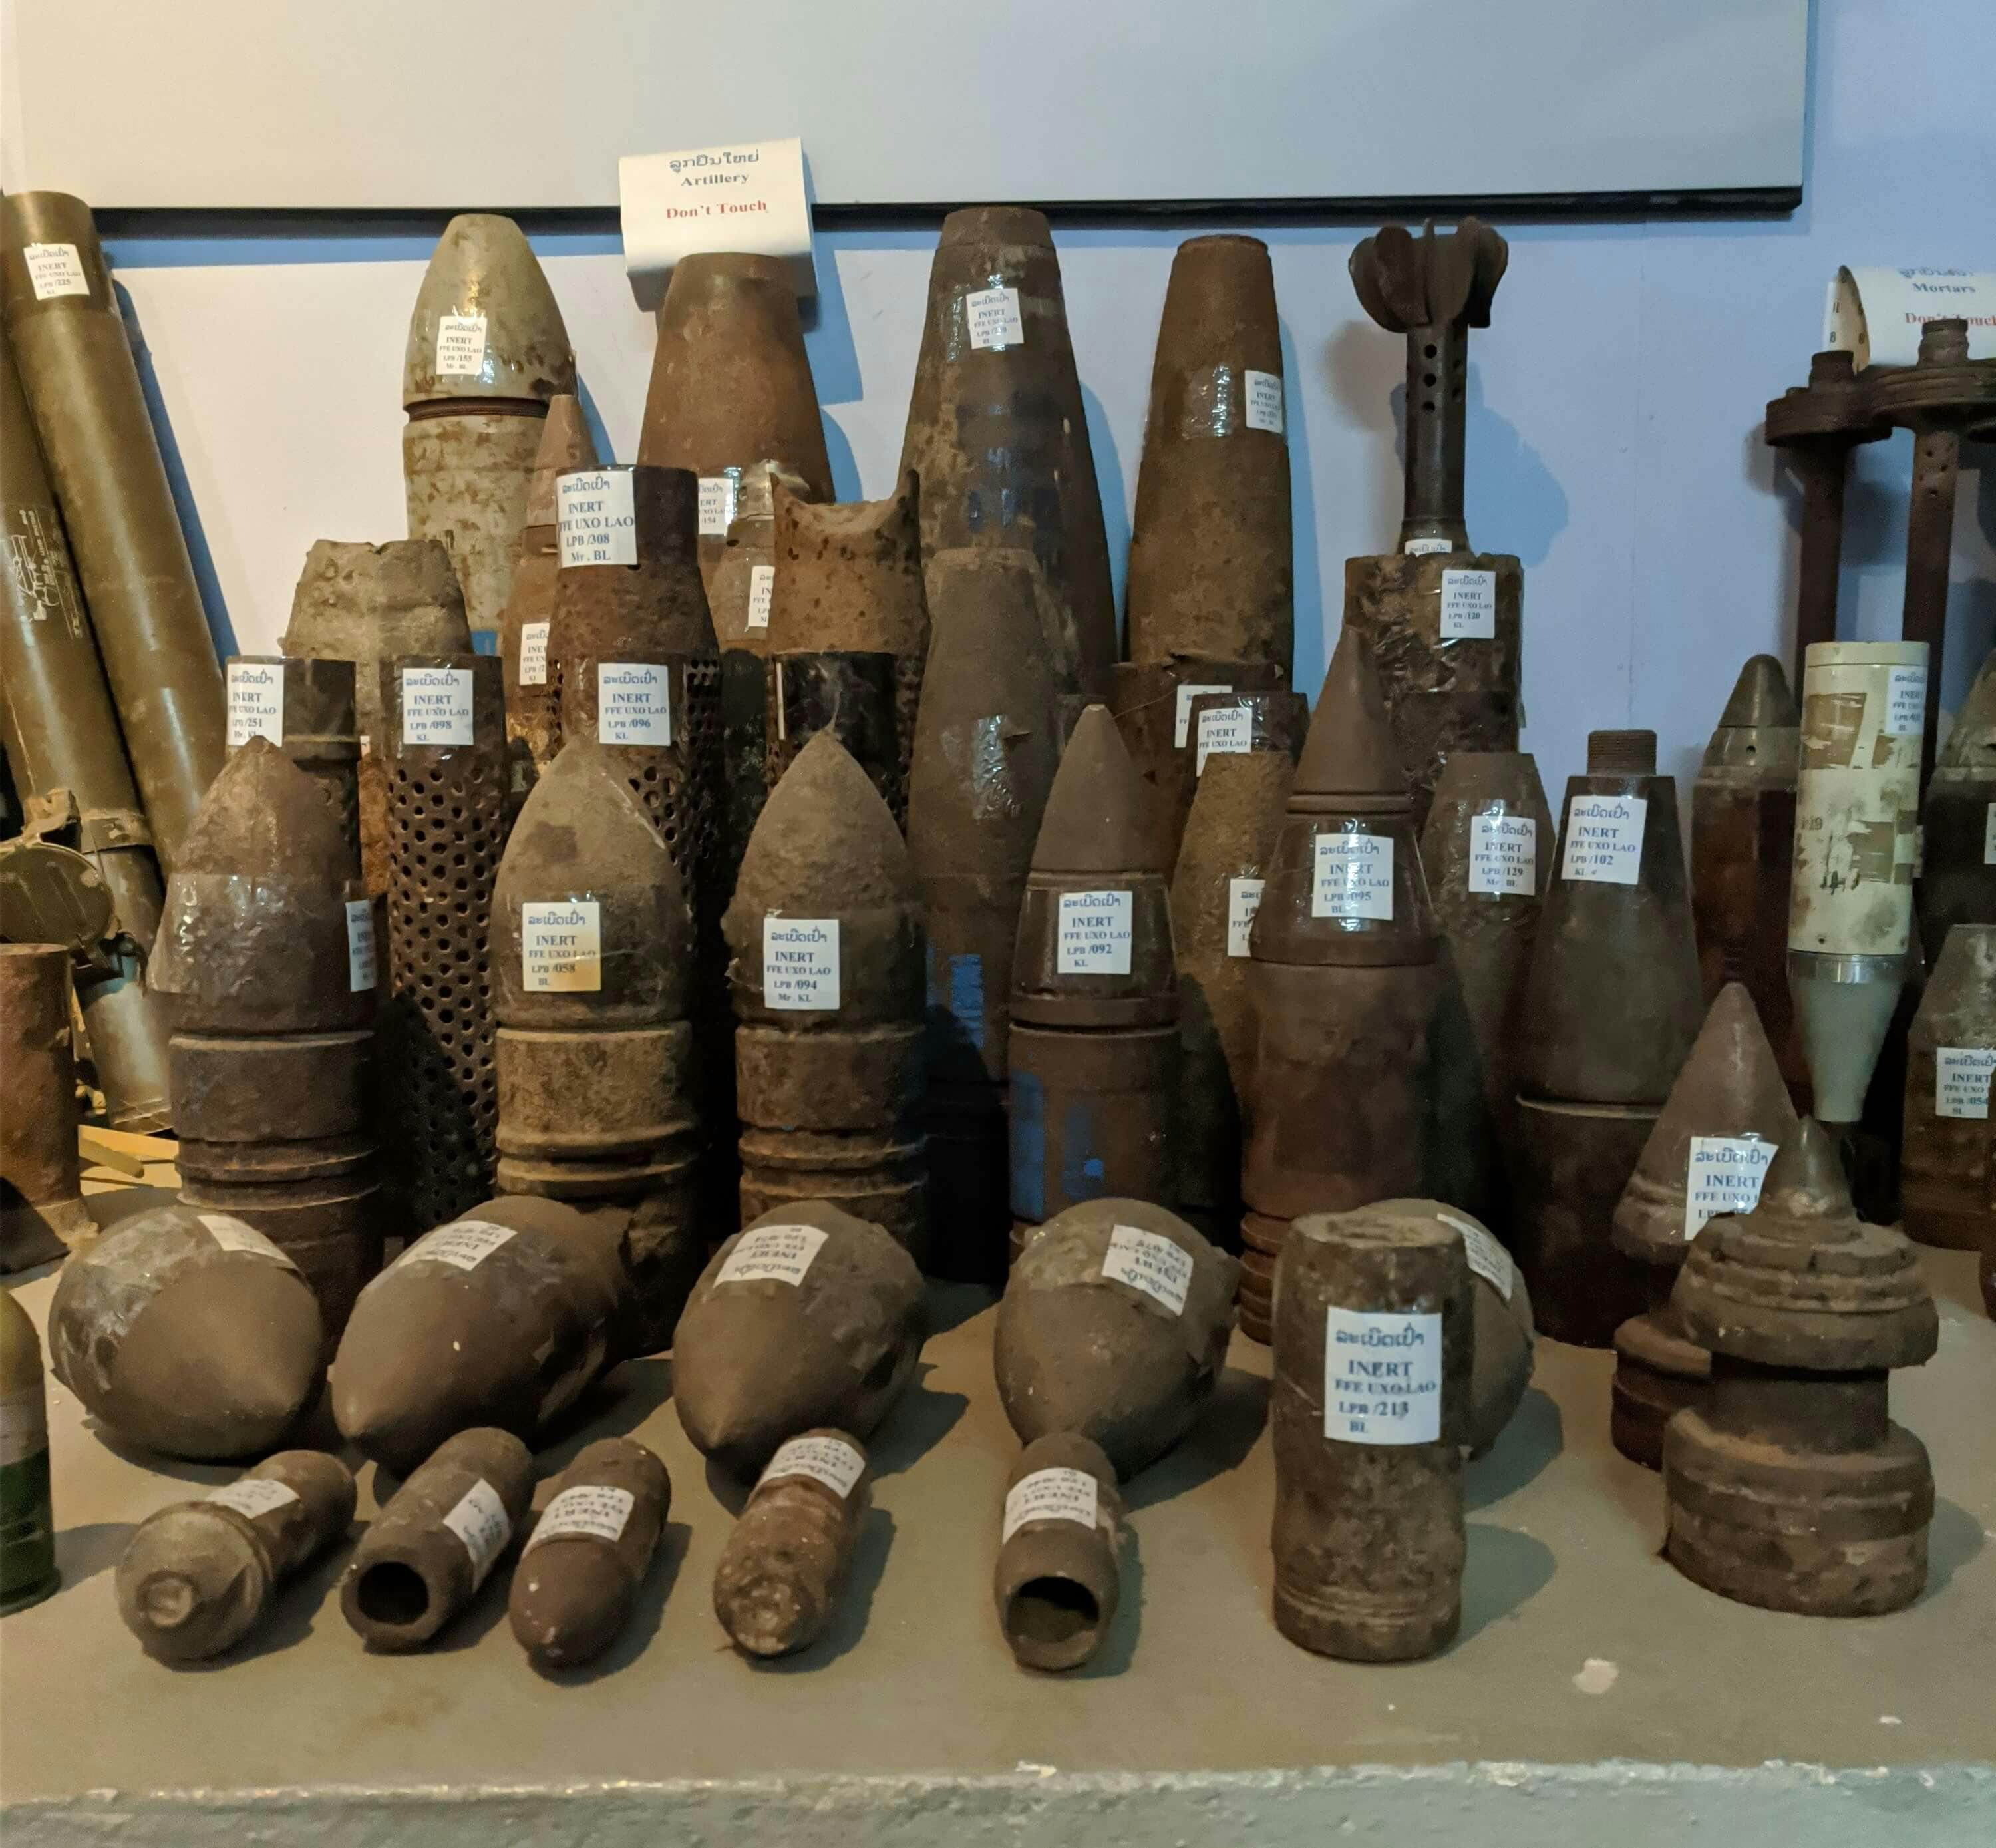 Some UXO found in Laos, on display at the COPE museum in Luang Prabang